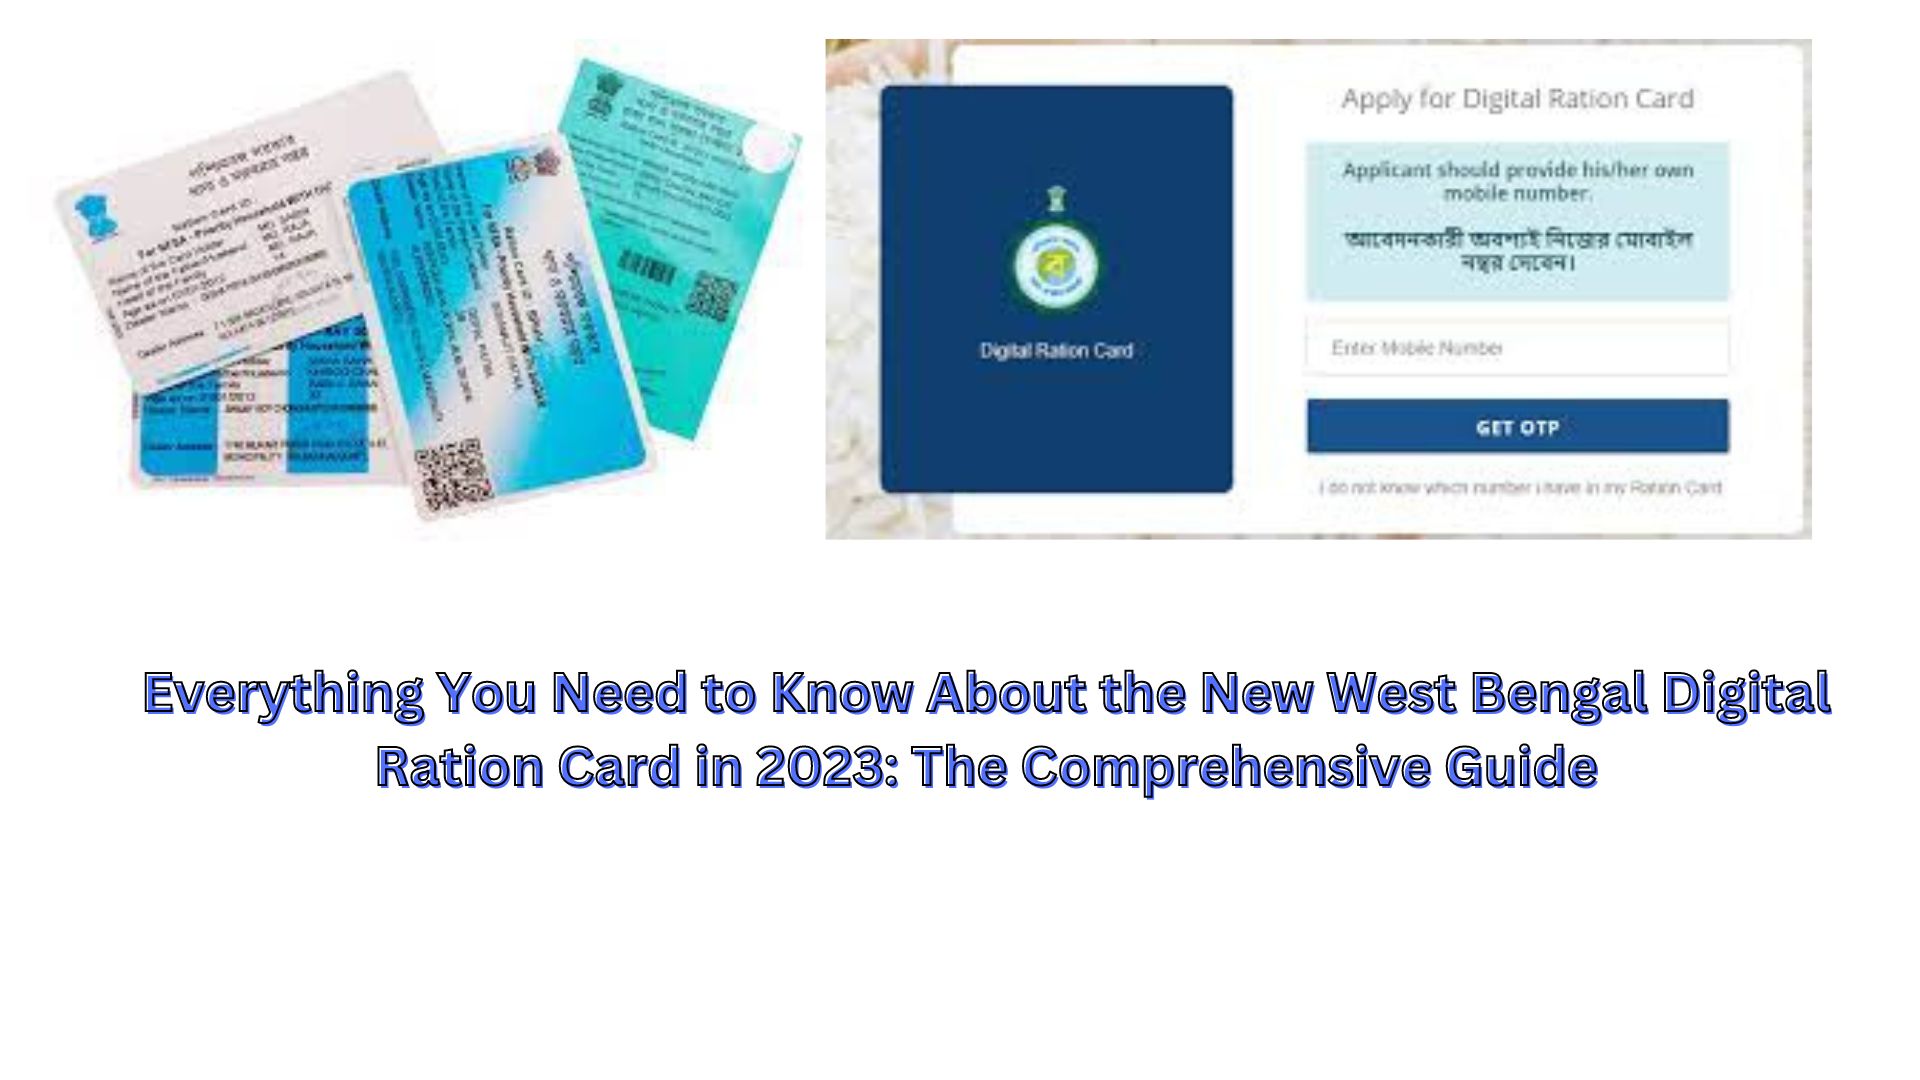 Everything You Need to Know About the New West Bengal Digital Ration Card in 2023: The Comprehensive Guide